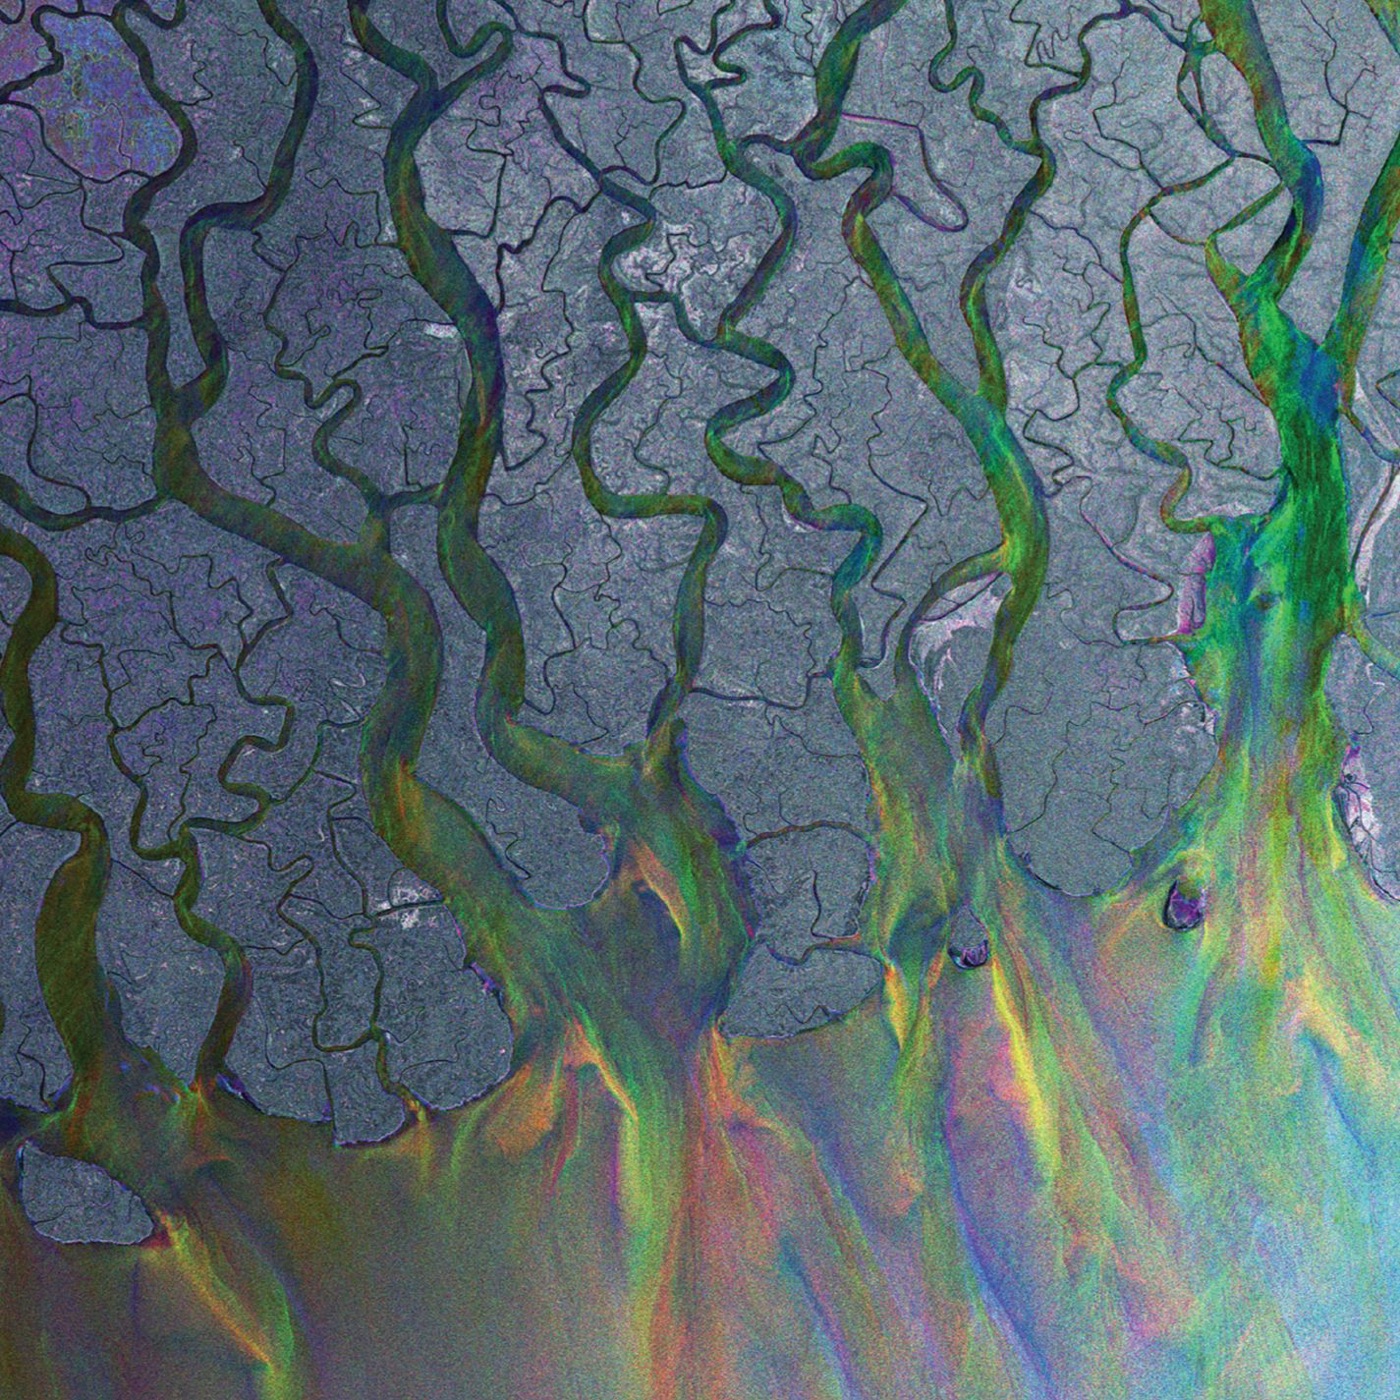 An Awesome Wave by Alt J